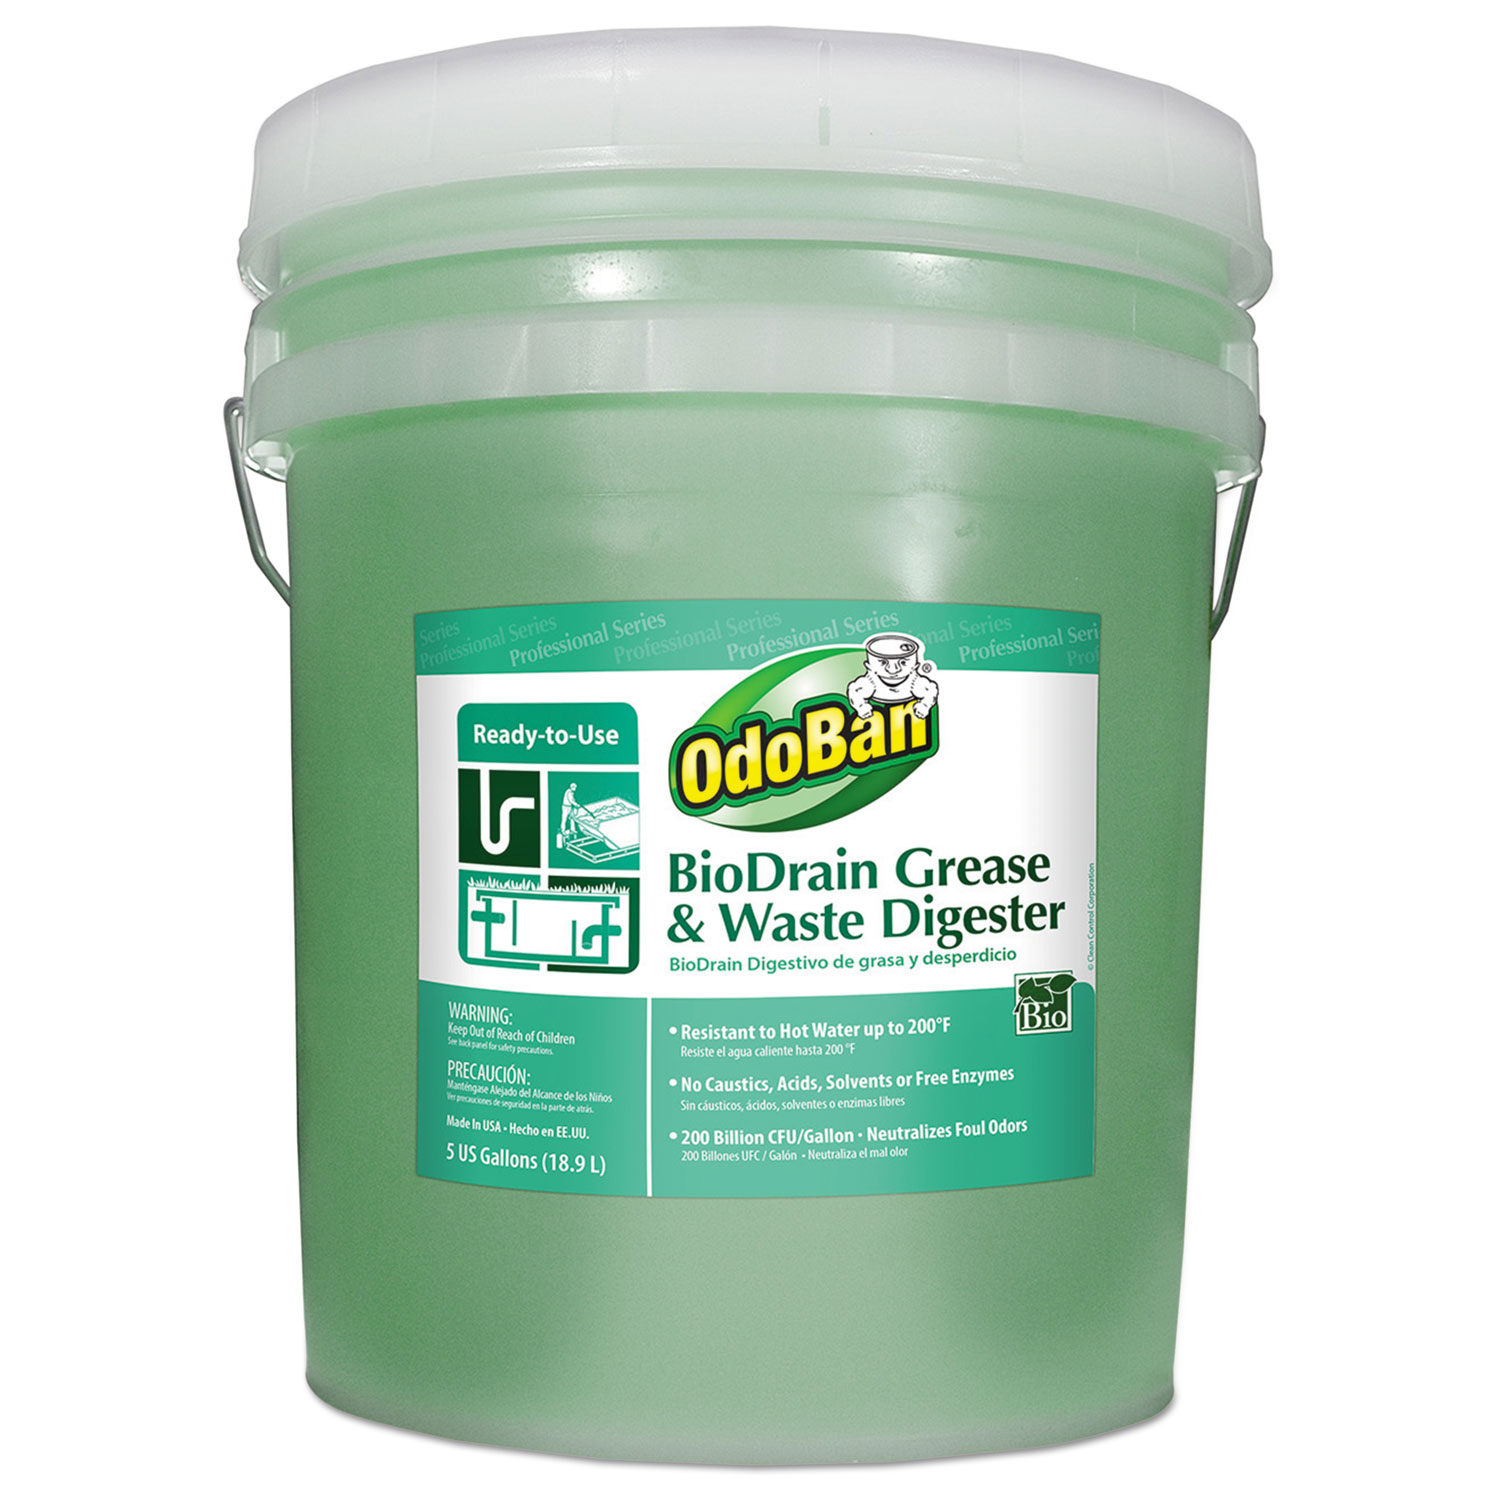 BioDrain Grease and Waste Digester, Floral Scent, 5 gal Pail